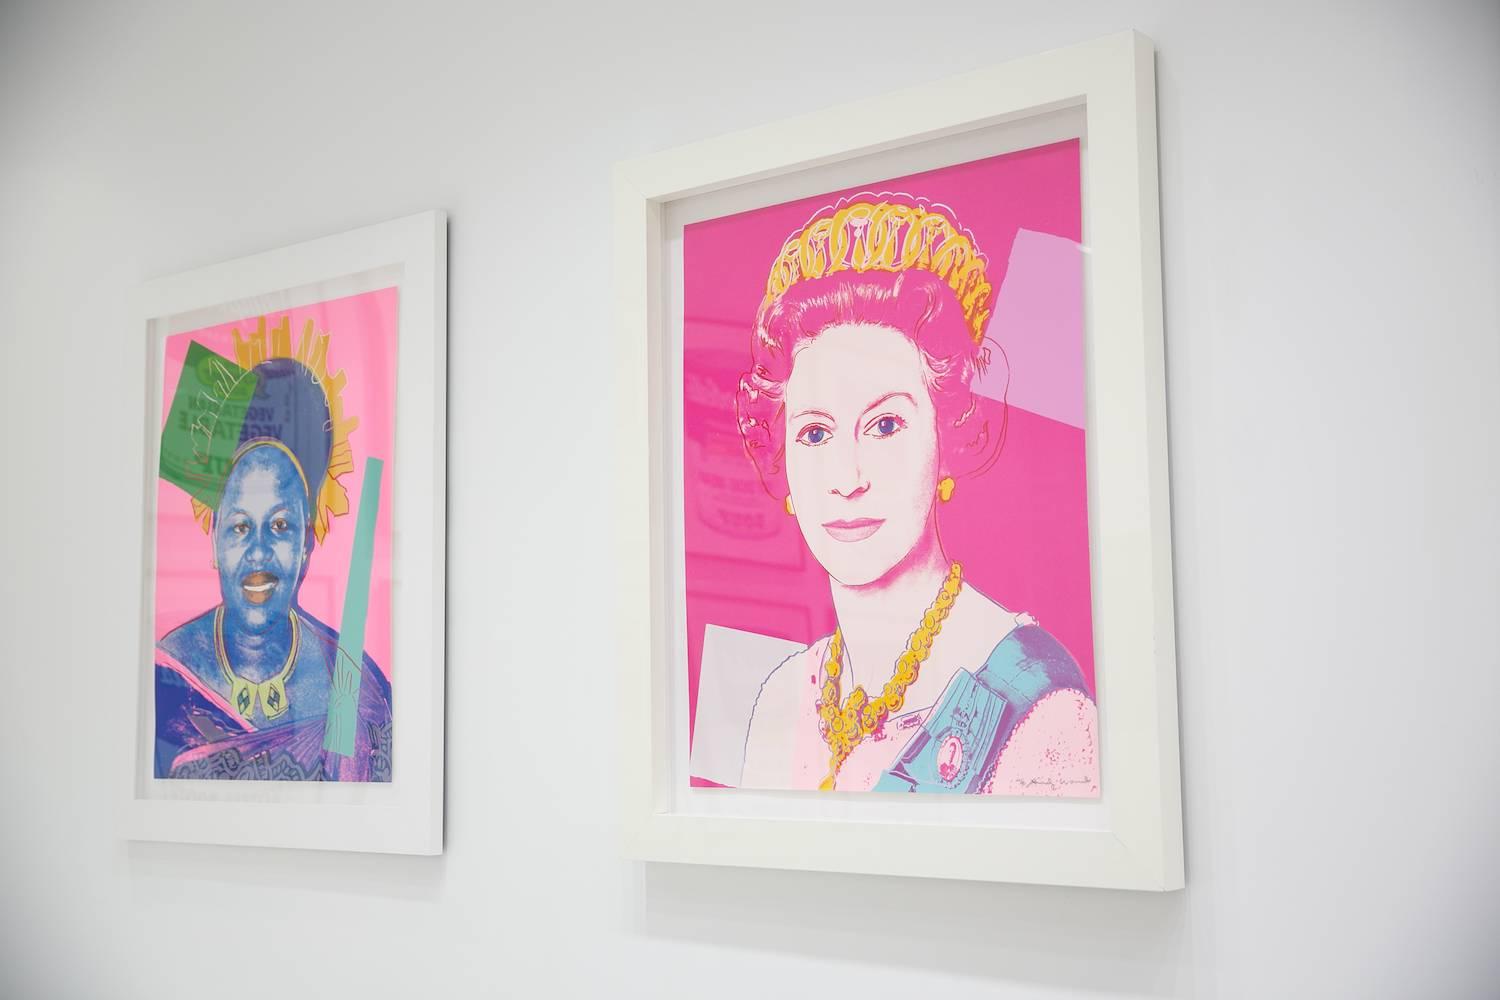 Title: Queen Elizabeth II of the United Kingdom 336
Medium: Screenprint on Lenox Museum Board.
Year: 1985
Size: 39 3/8″ x 31 1/2″
Edition: Edition of 40, signed and numbered in pencil.

Andy Warhol created Queen Elizabeth II of the United